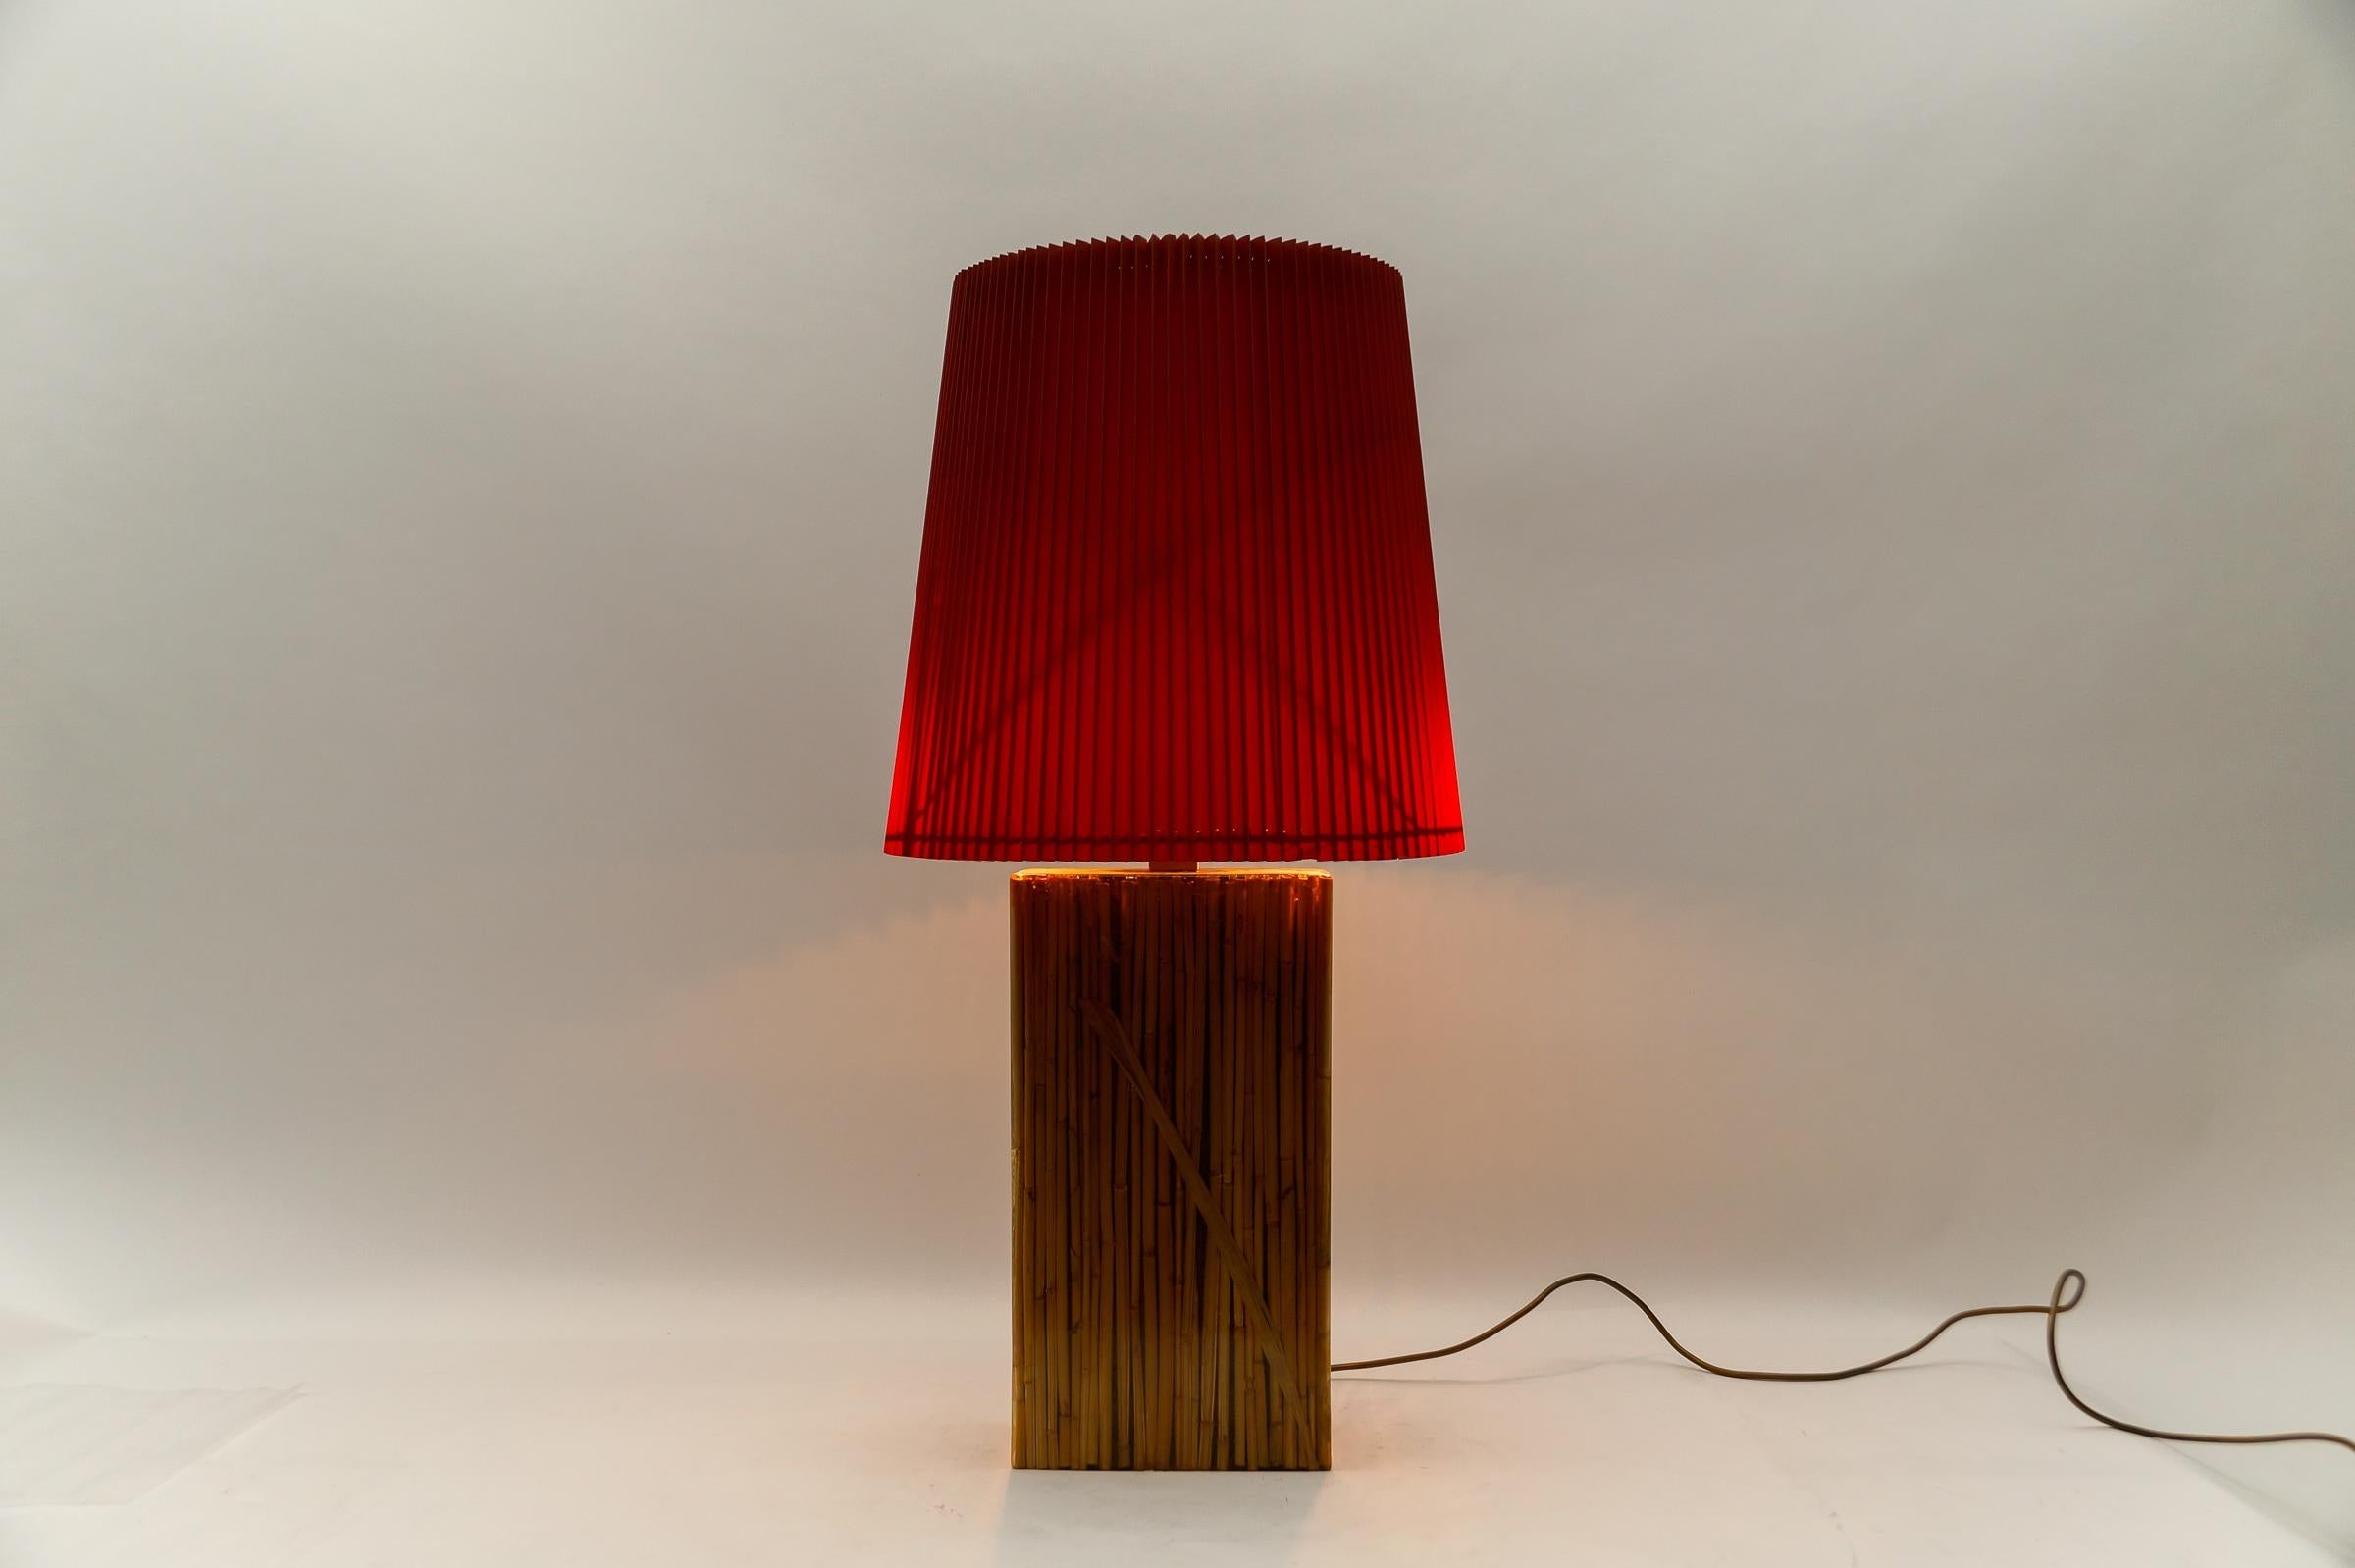 Large Riccardo Marzi Bamboo Resin Table Lamp.

The base alone has the dimensions of: Height: 46 cm (18.12 in)Width: 25 cm (9.85 in)Depth: 15 cm (5.91 in).

With two E14 sockets. and one E27 socket,  Works with 220V and 110V.

Light bulbs are not